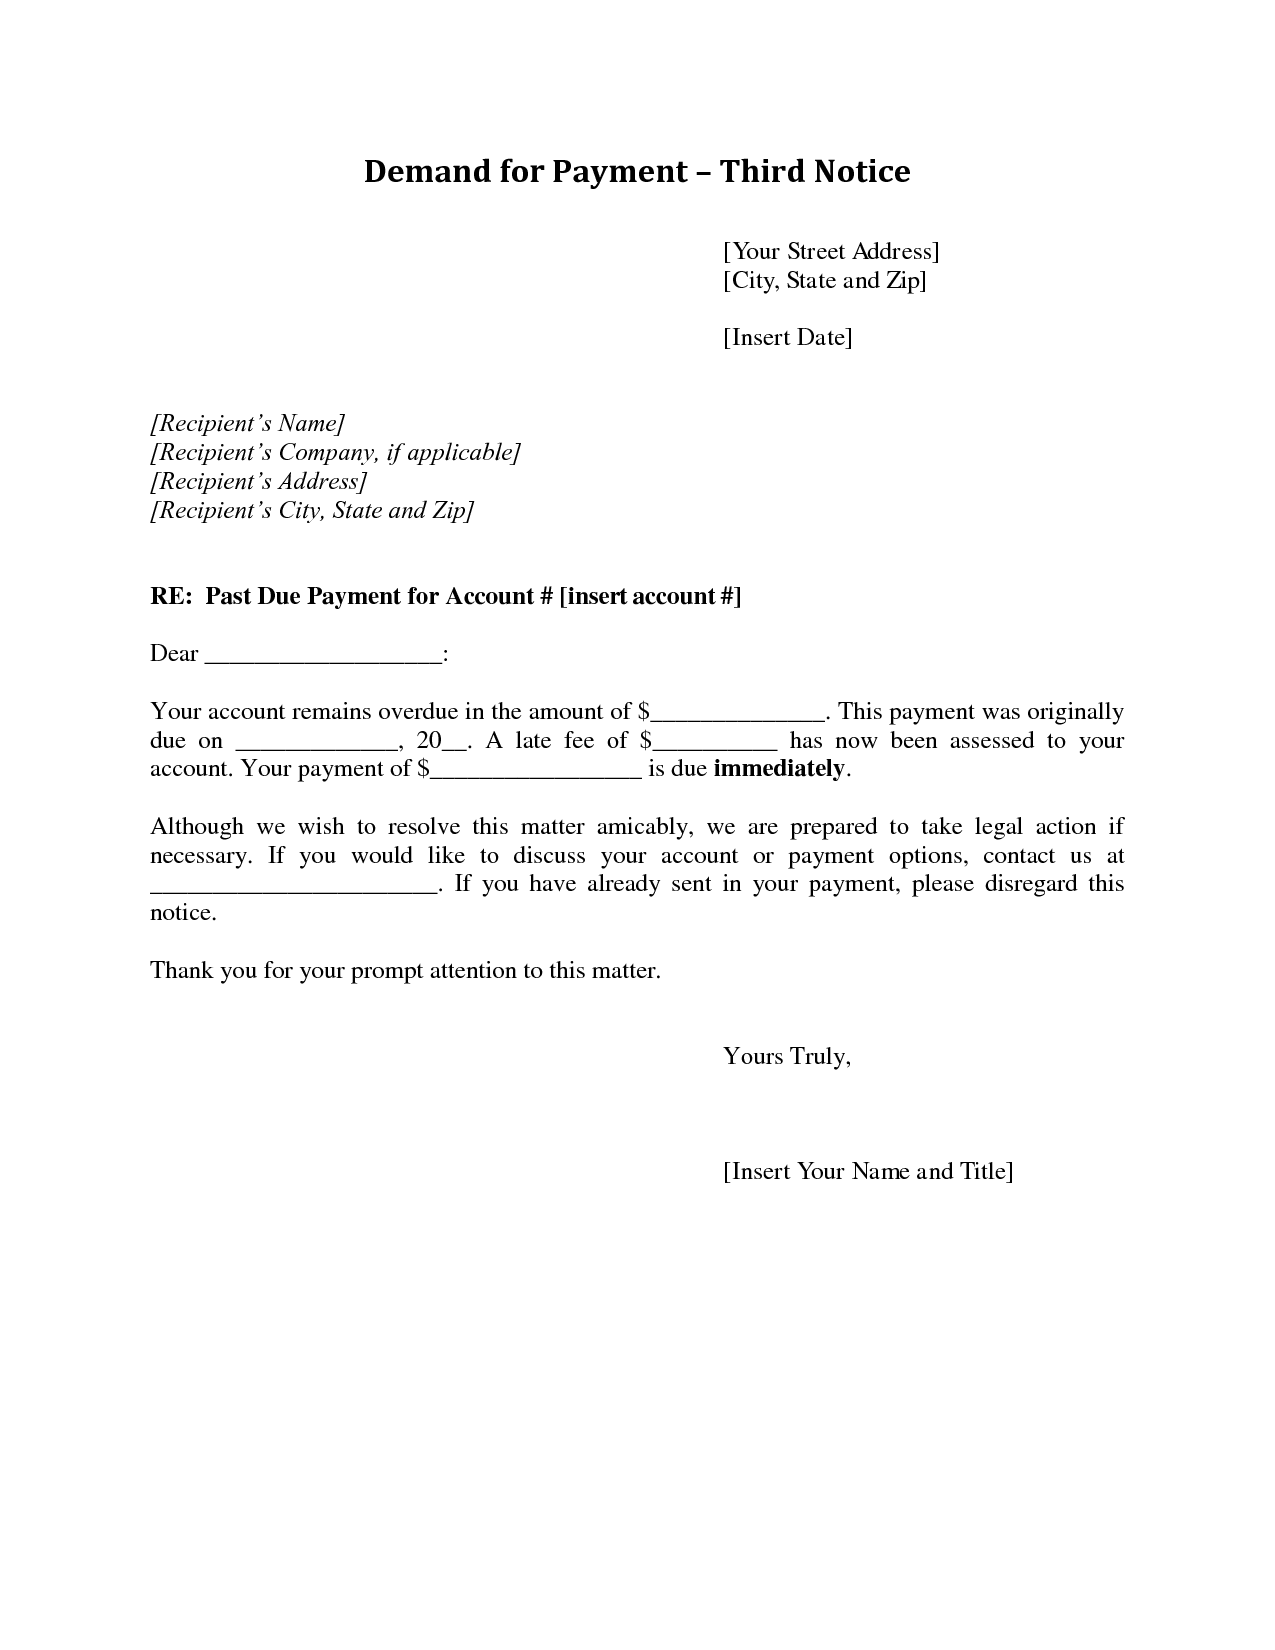 demand-for-payment-letter-template-free-printable-documents